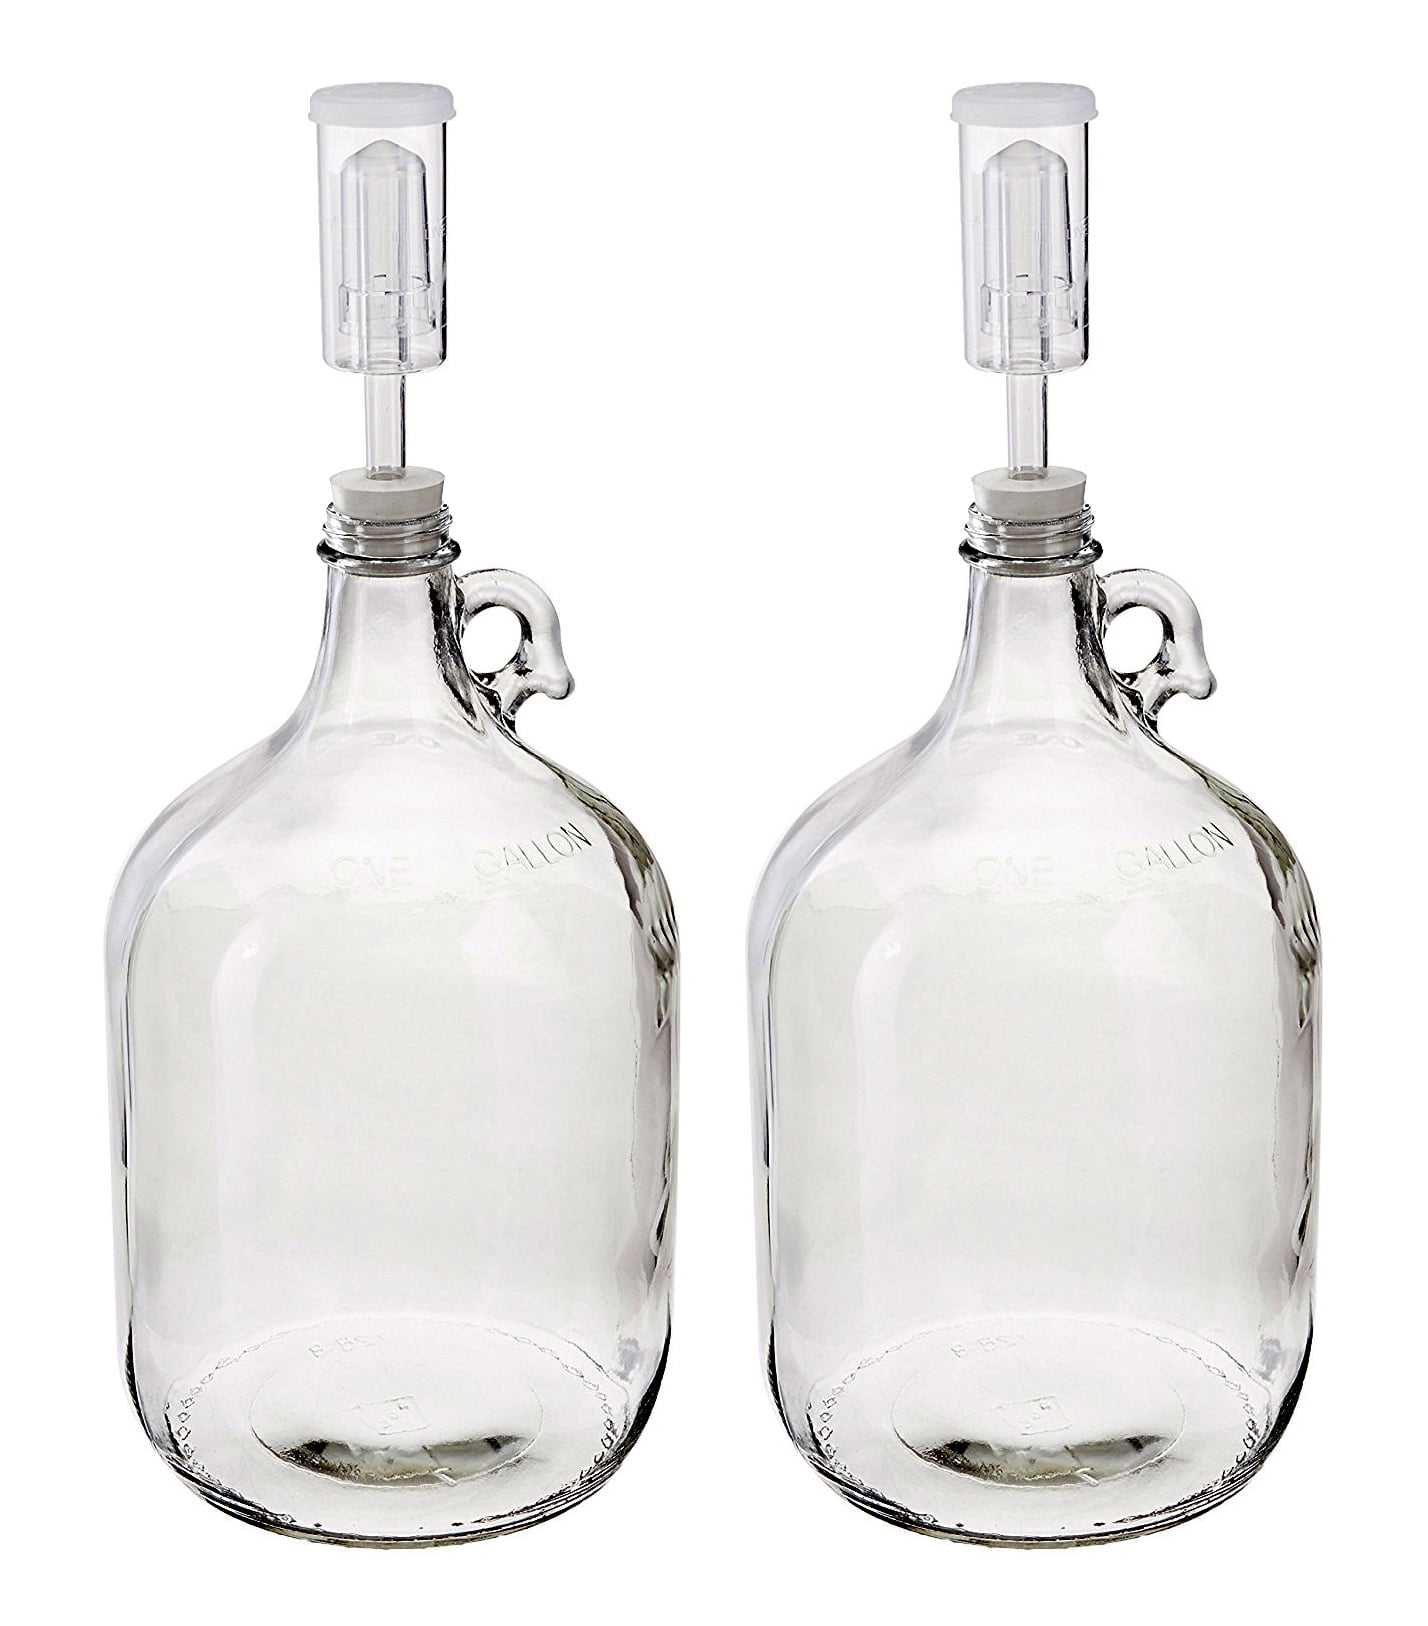 3 Plastic Safety Cork Bungs Homebrew Demijohn Bung With Pressure Release Valve 